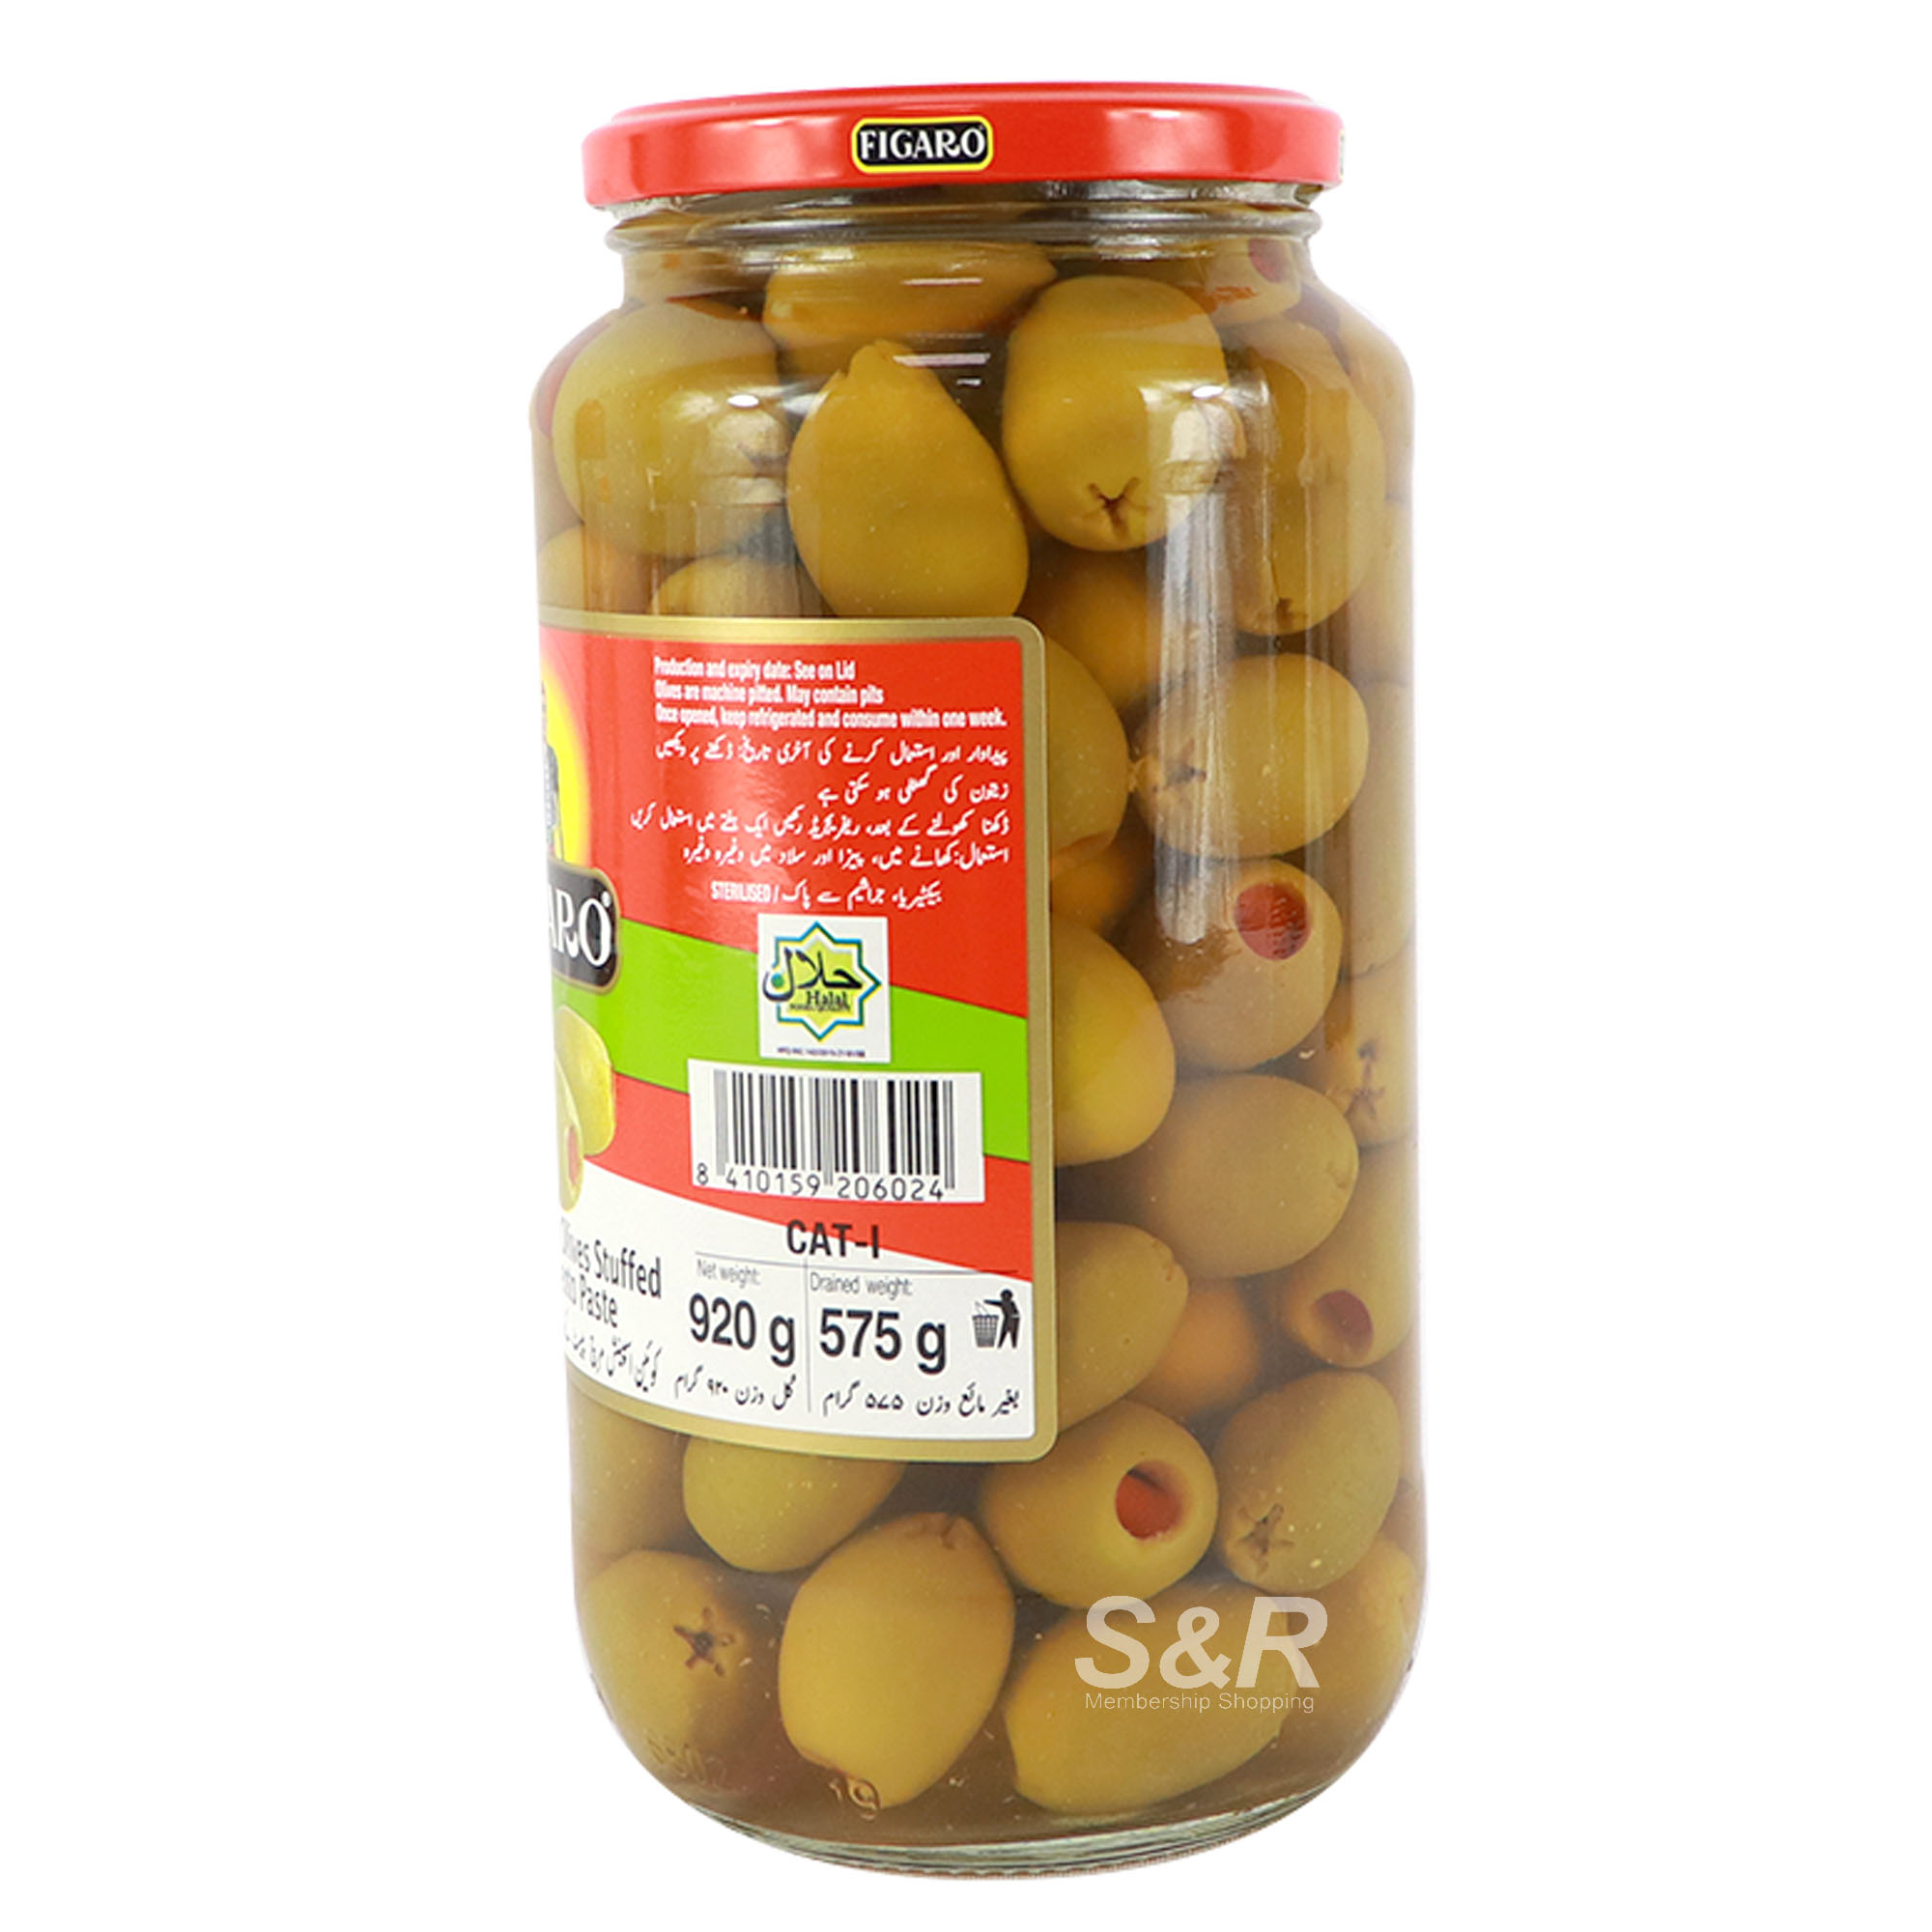 Queen Green Olives Stuffed with Pimiento Paste